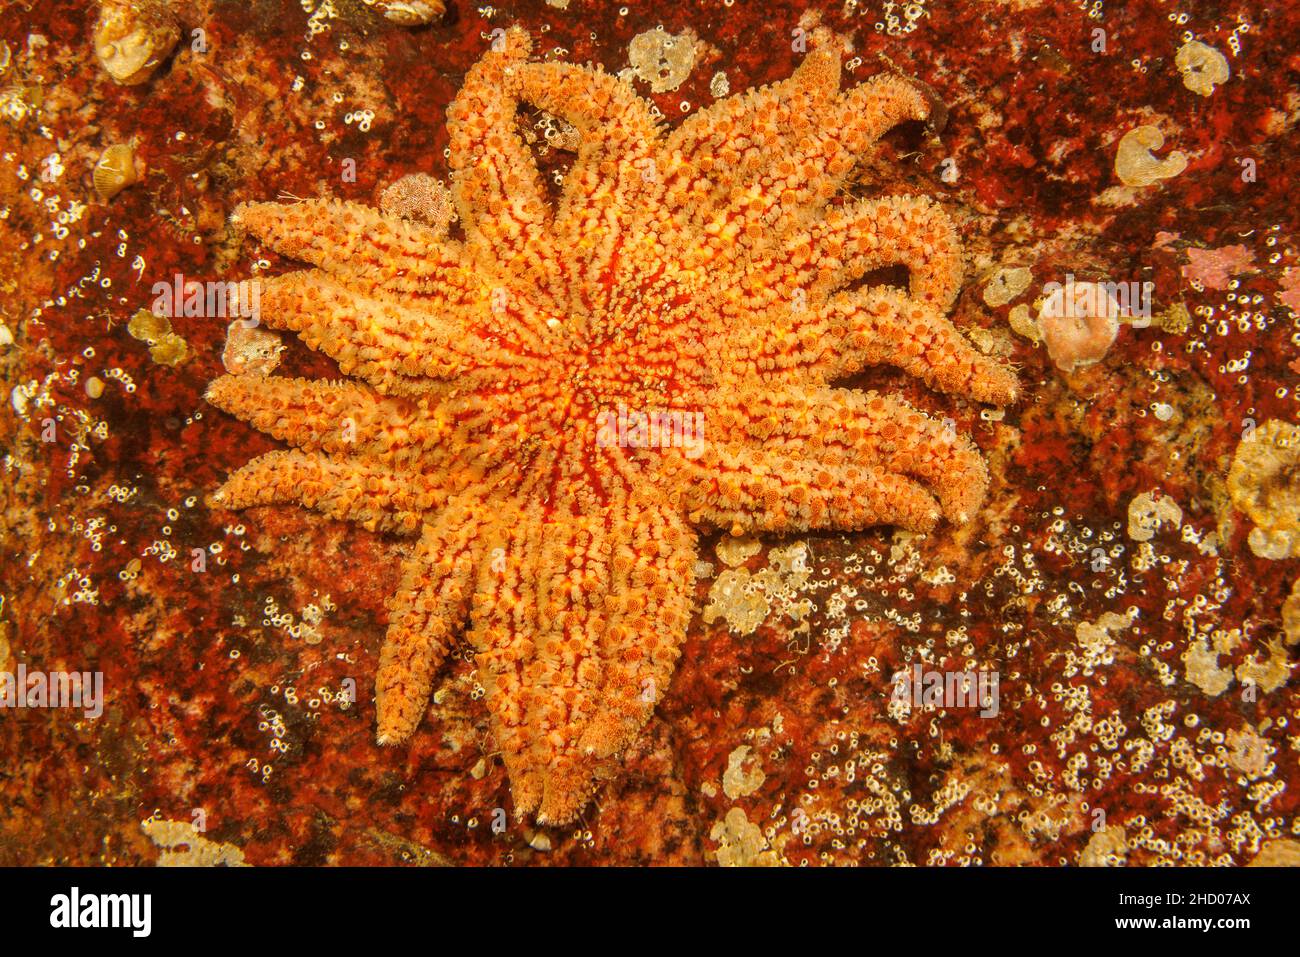 The sunflower star, Pycnopodia helianthoides, is the largest of seastars. Since 2013 a wasting disease has reduced their numbers by over 90% and they Stock Photo